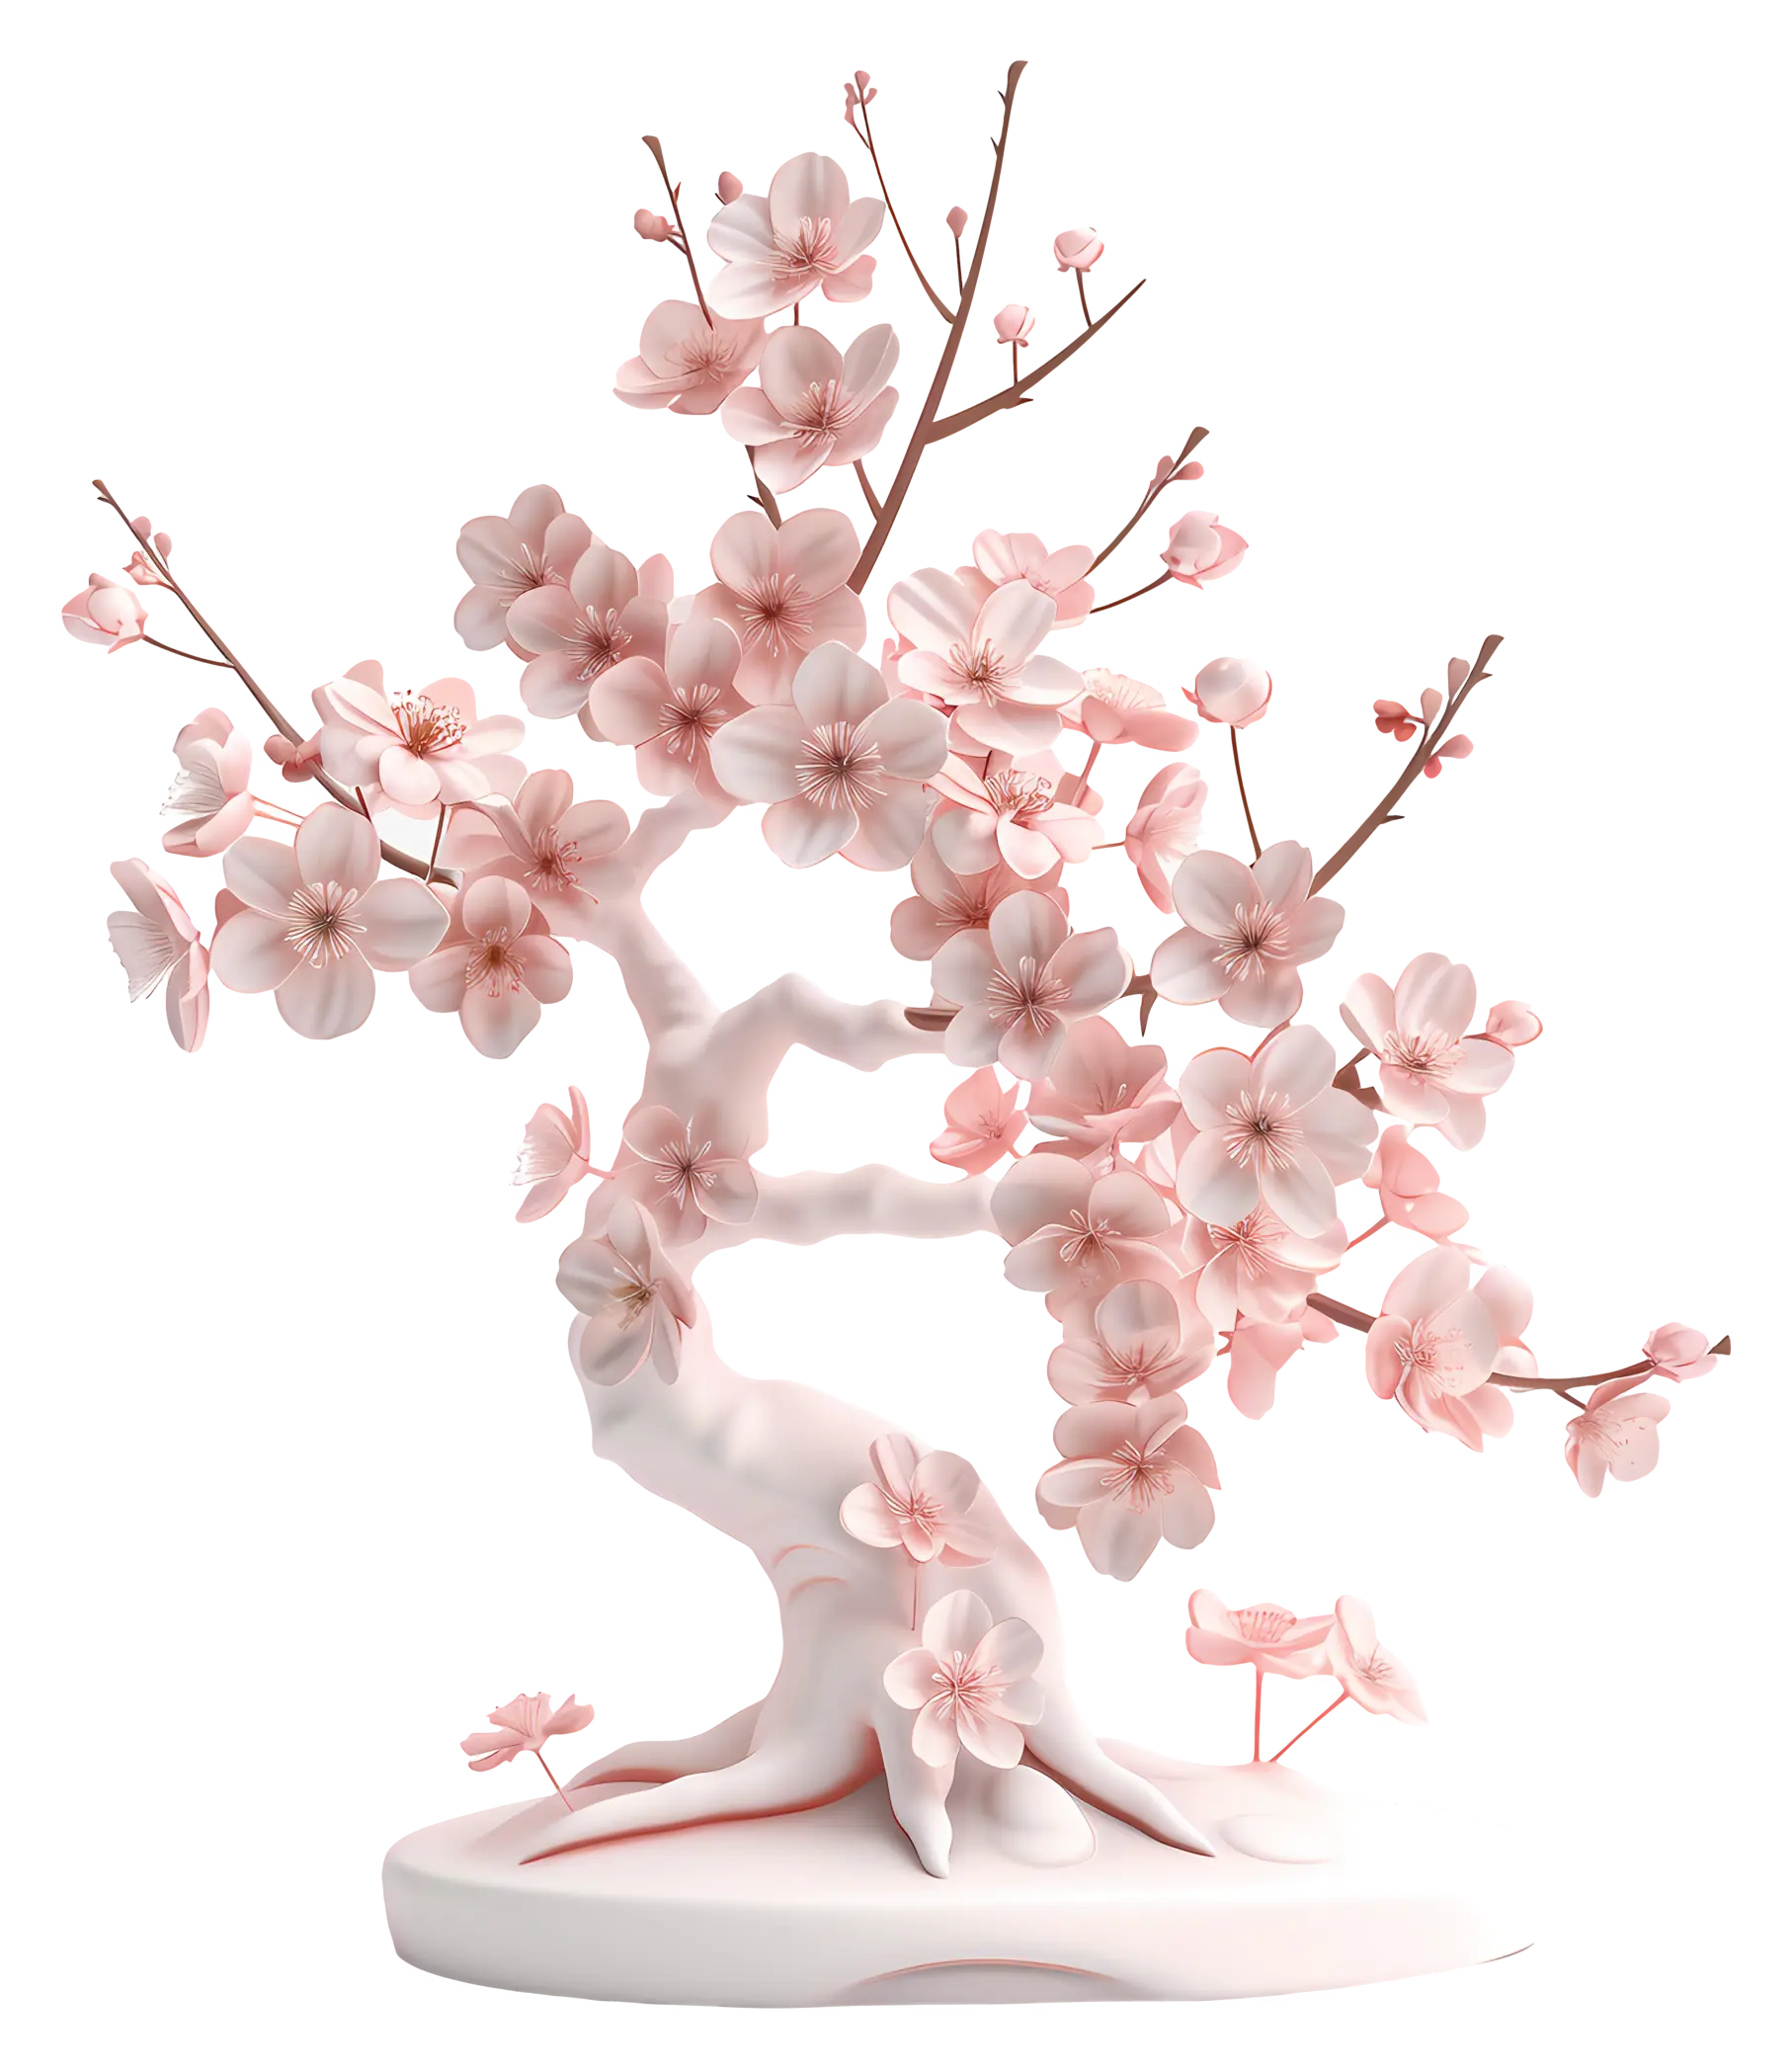 A computer-generated sculpture of a pink cherry blossom tree.